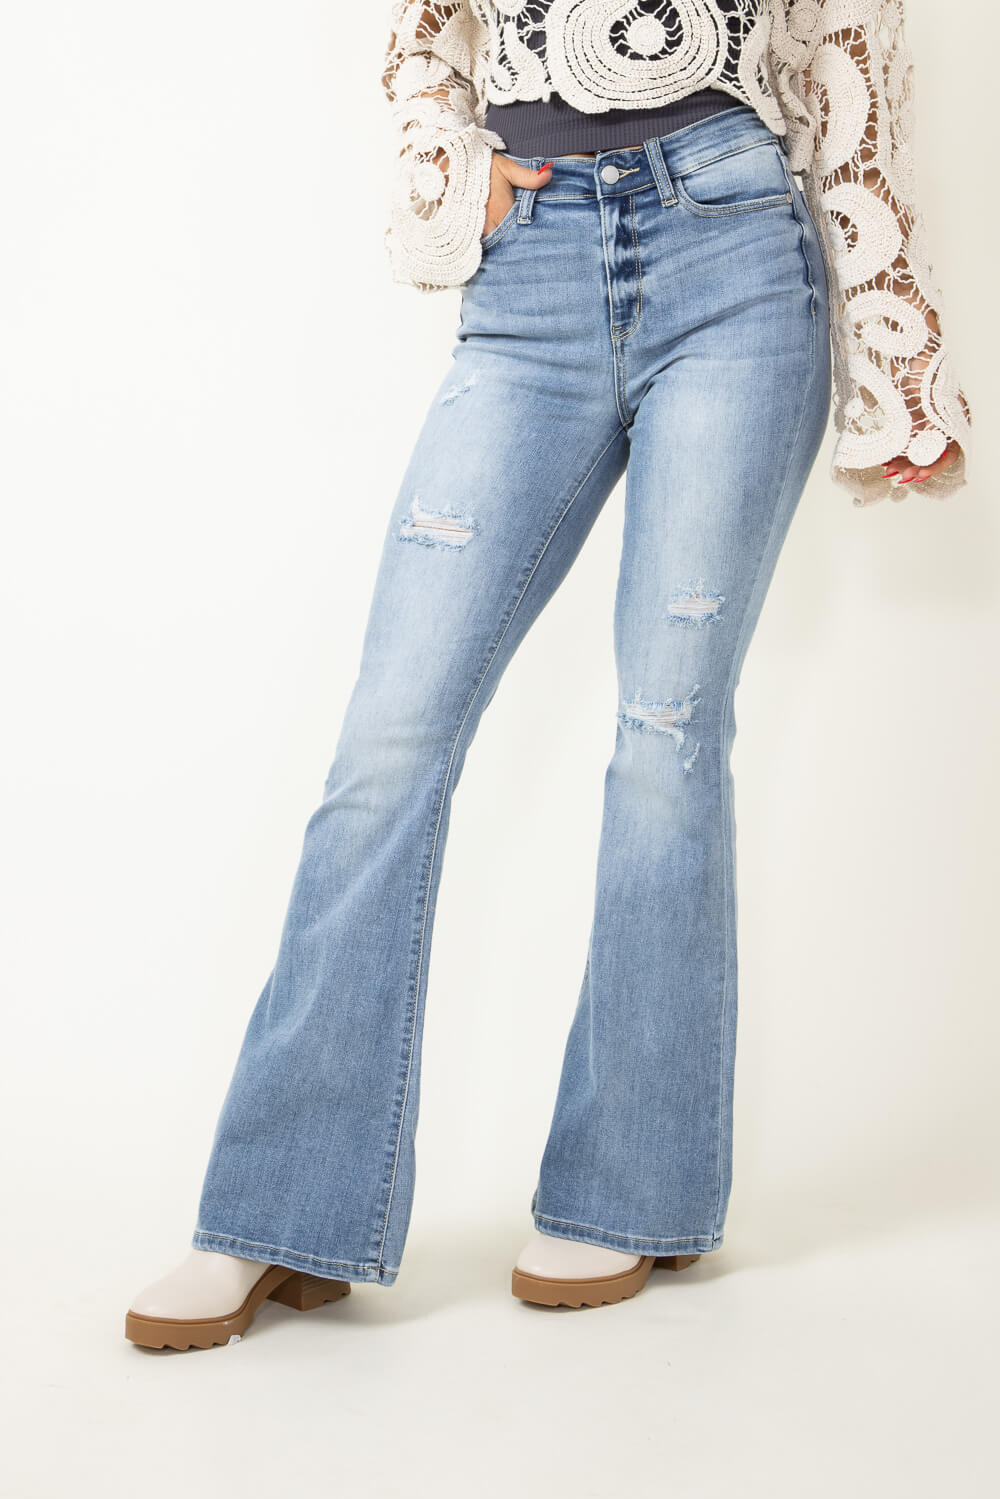 Vintage Denim High Flare Jeans For Women Middle Waist, Distressed